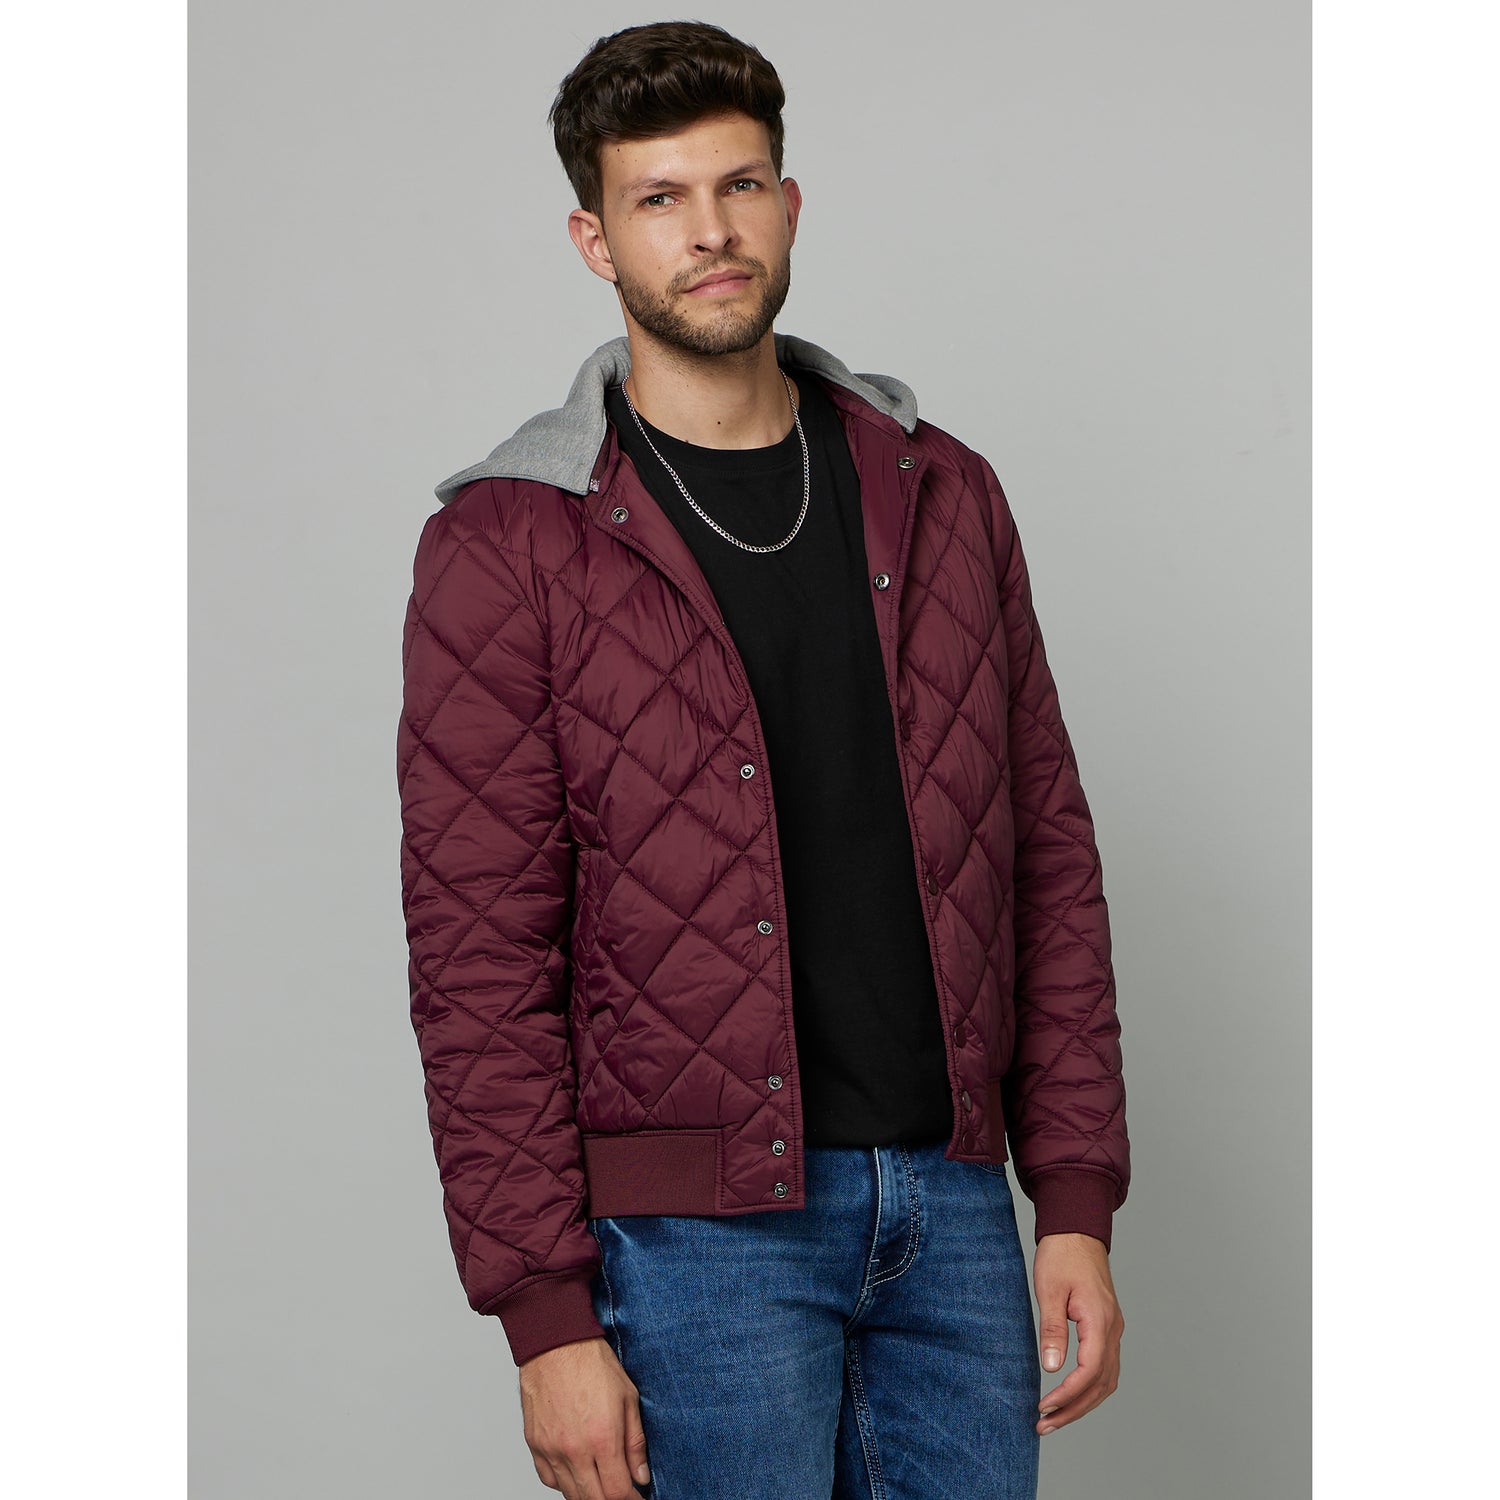 Burgundy Hooded Puffer Jacket (FUQUILTED)